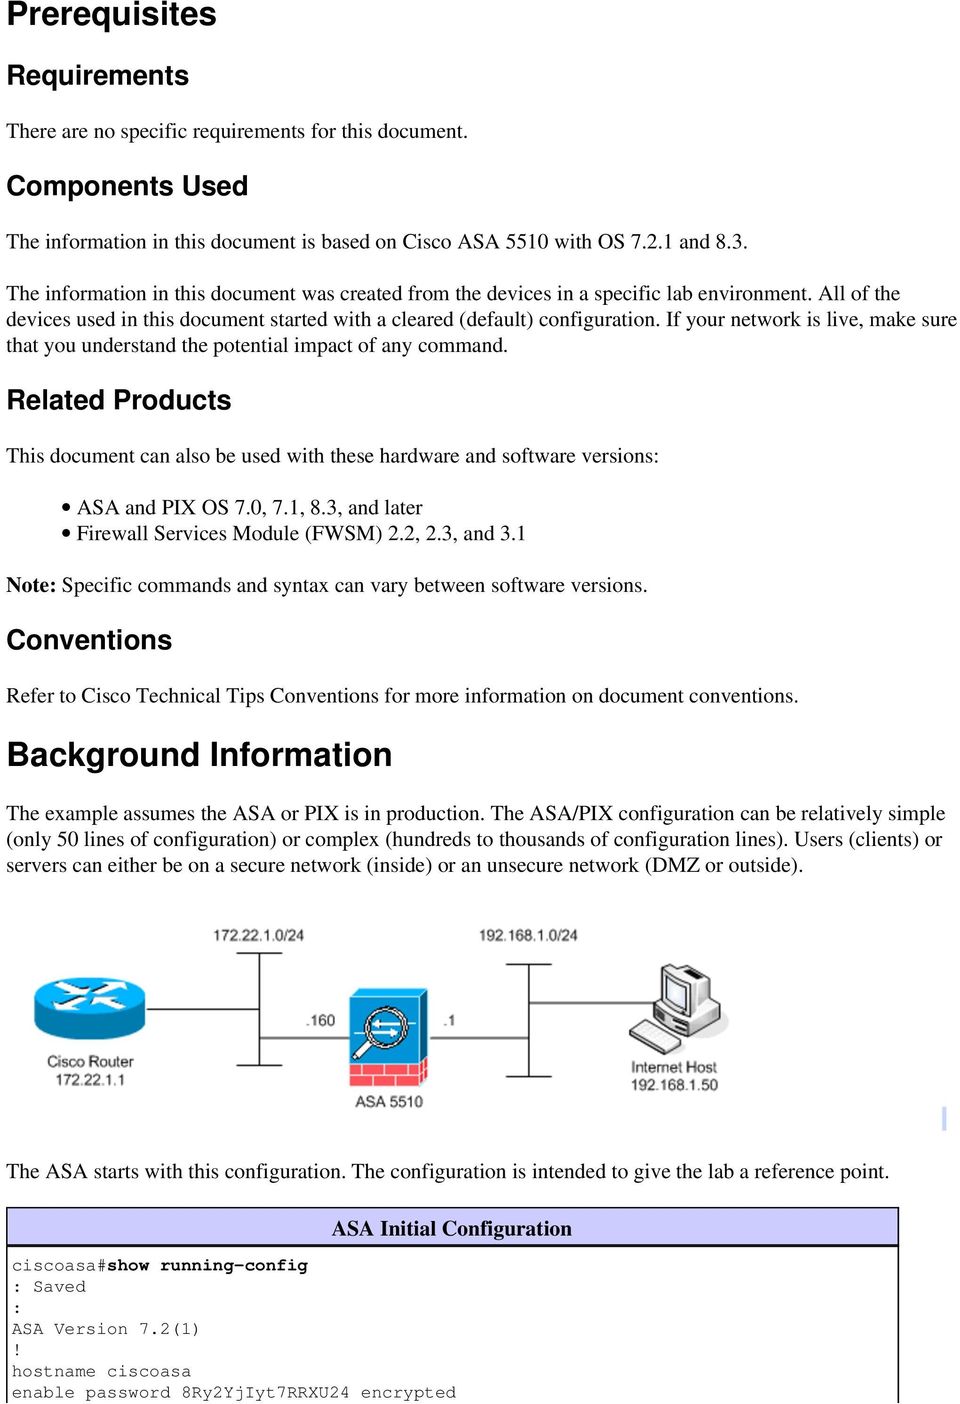 If your network is live, make sure that you understand the potential impact of any command. Related Products This document can also be used with these hardware and software versions: ASA and PIX OS 7.